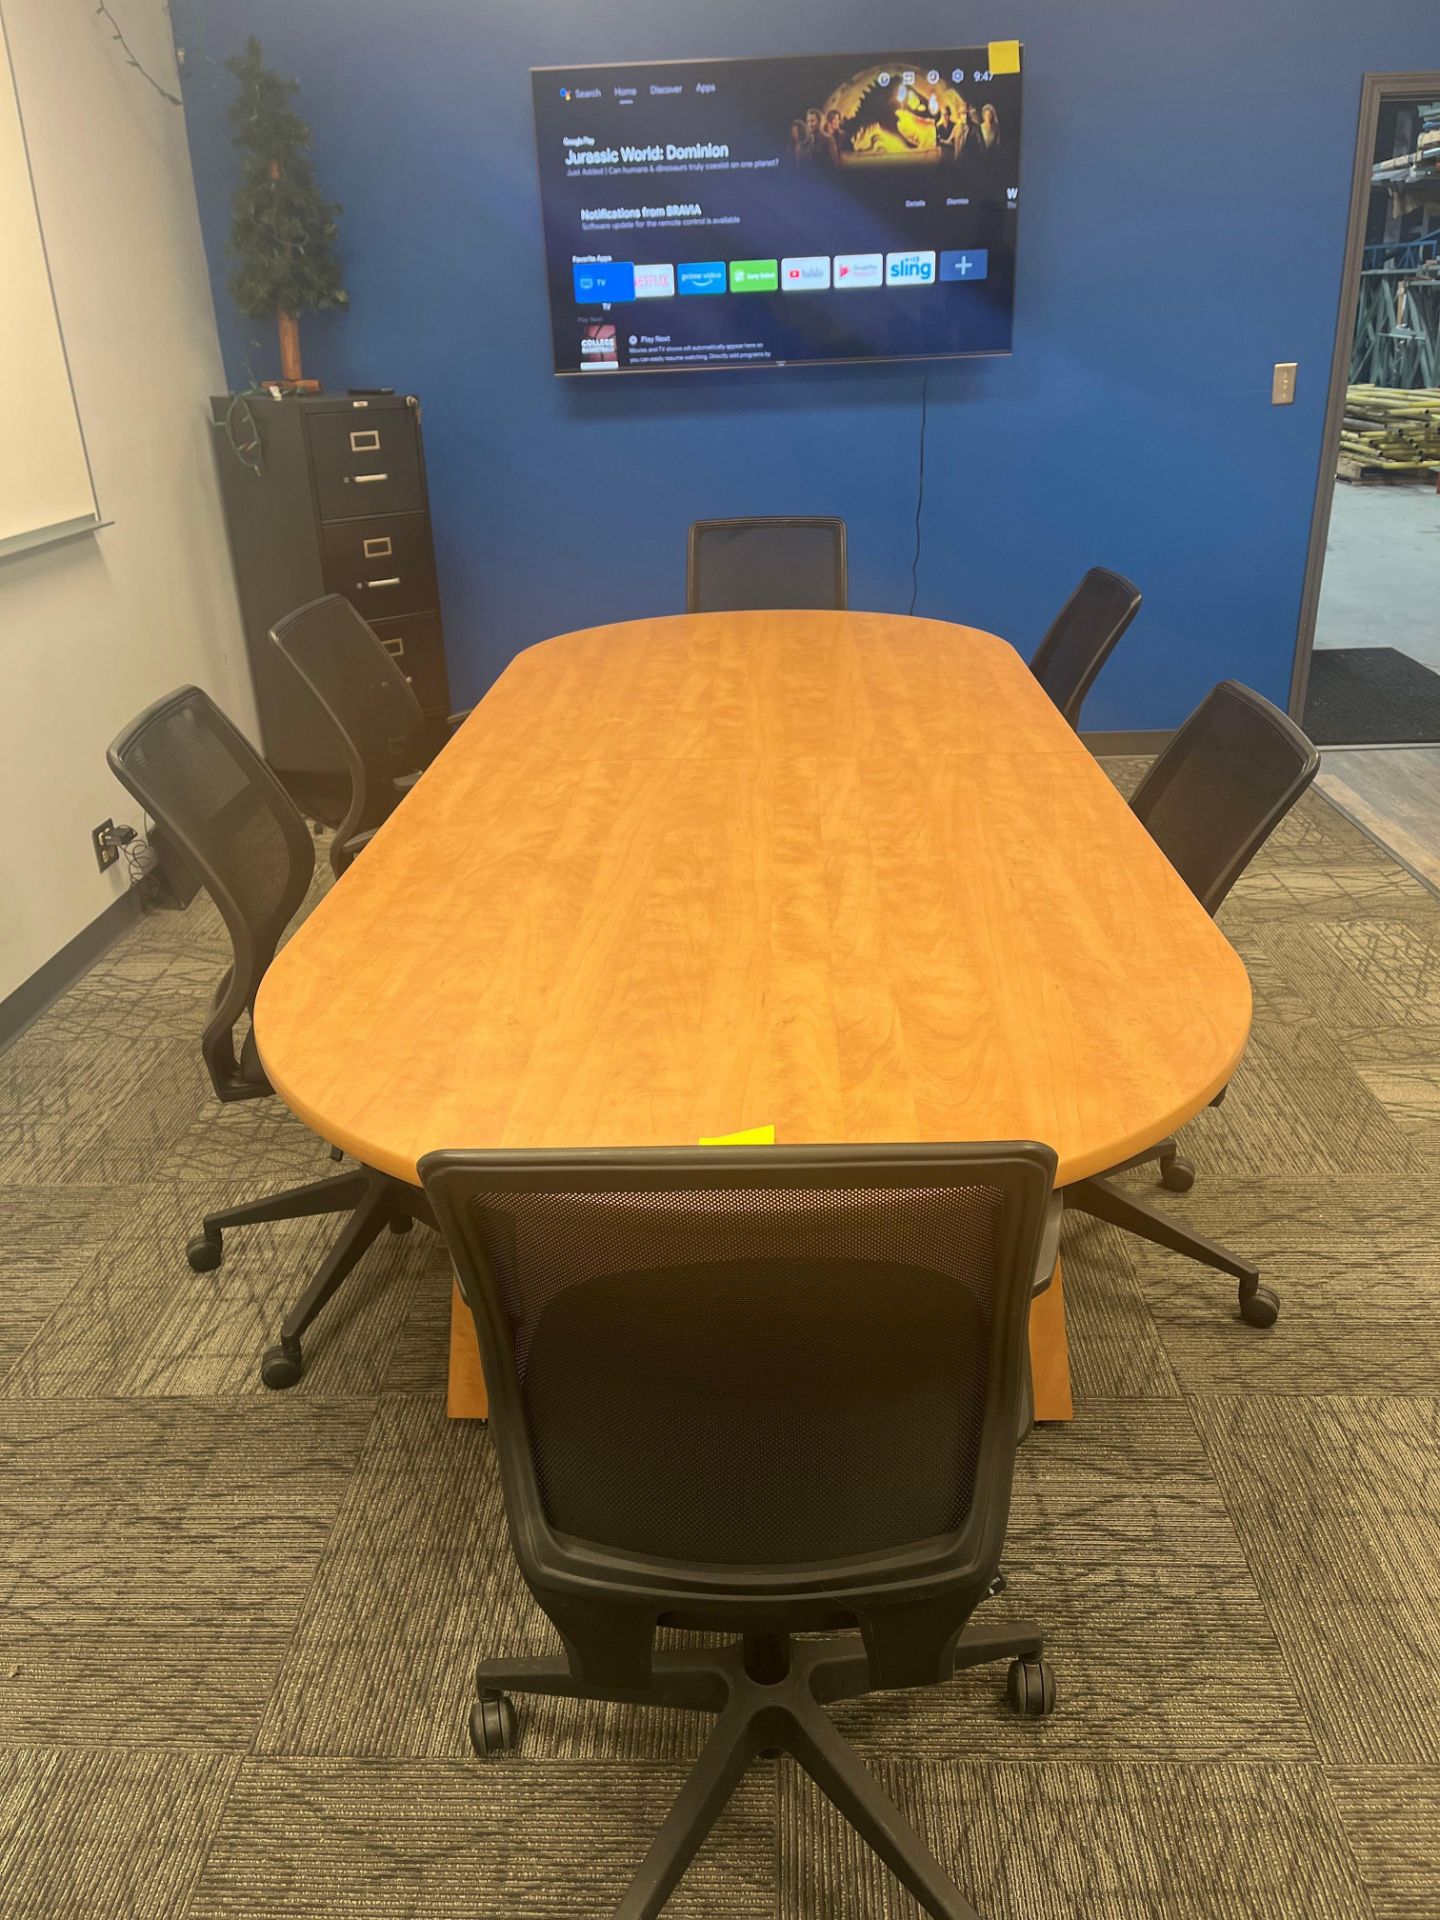 CONFERENCE ROOM TABLE WITH 6 ROLLING CHAIRS - Image 3 of 3